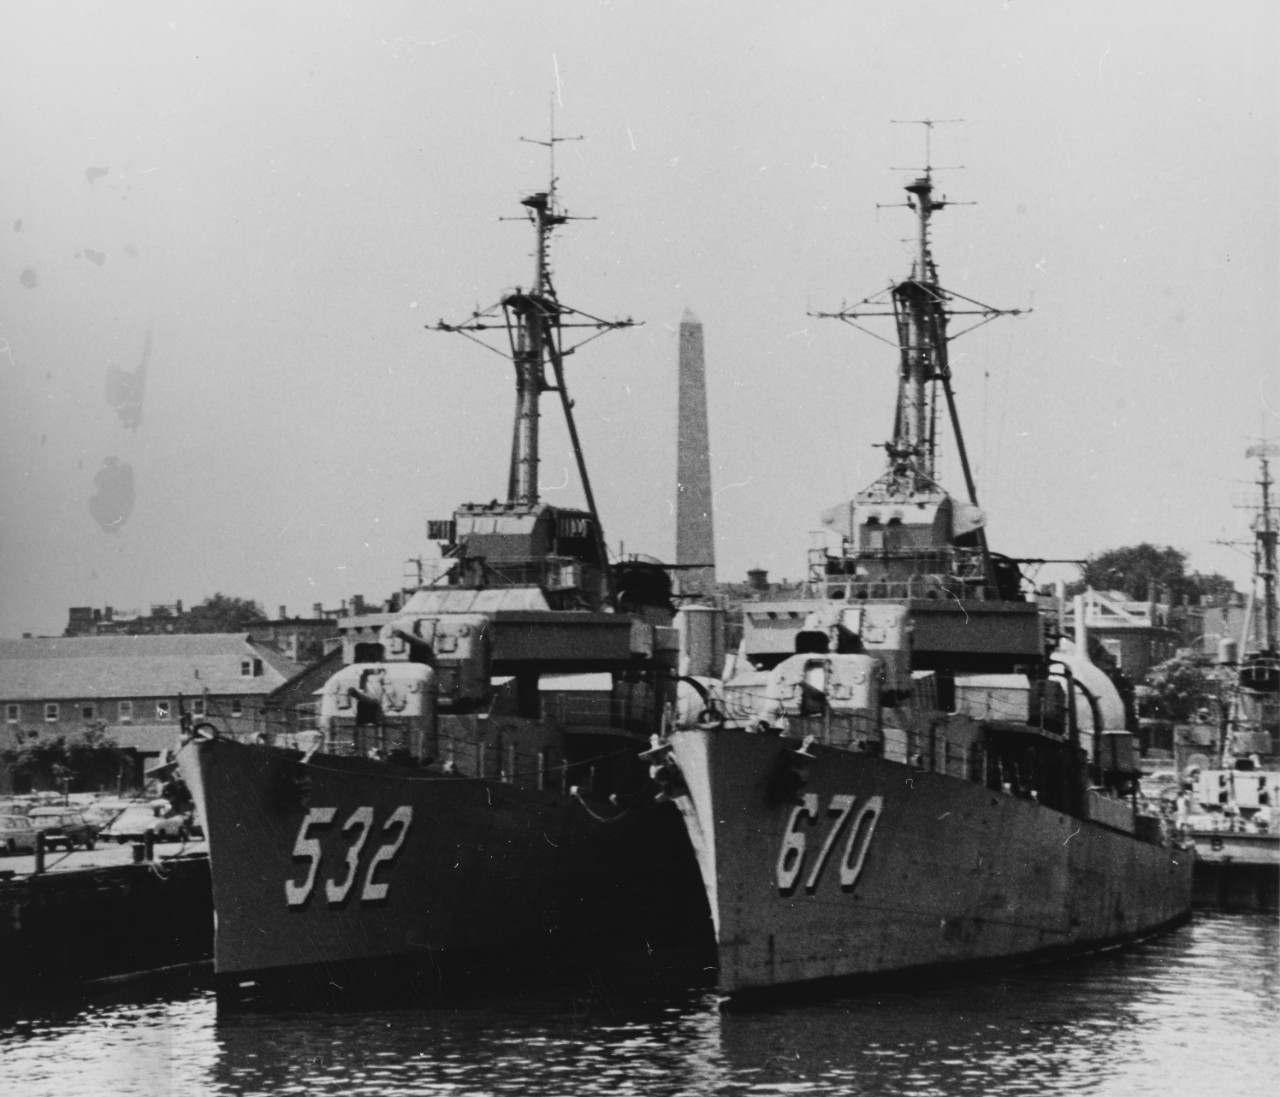 Heermann (pictured on the left) moored alongside Dortch (DD-670) at the Boston Naval Shipyard, shortly before both destroyers were transferred to Argentina in August 1961. Note the Bunker Hill Battle Monument in the background. (Naval History and Heritage Command Photograph NH 72671)